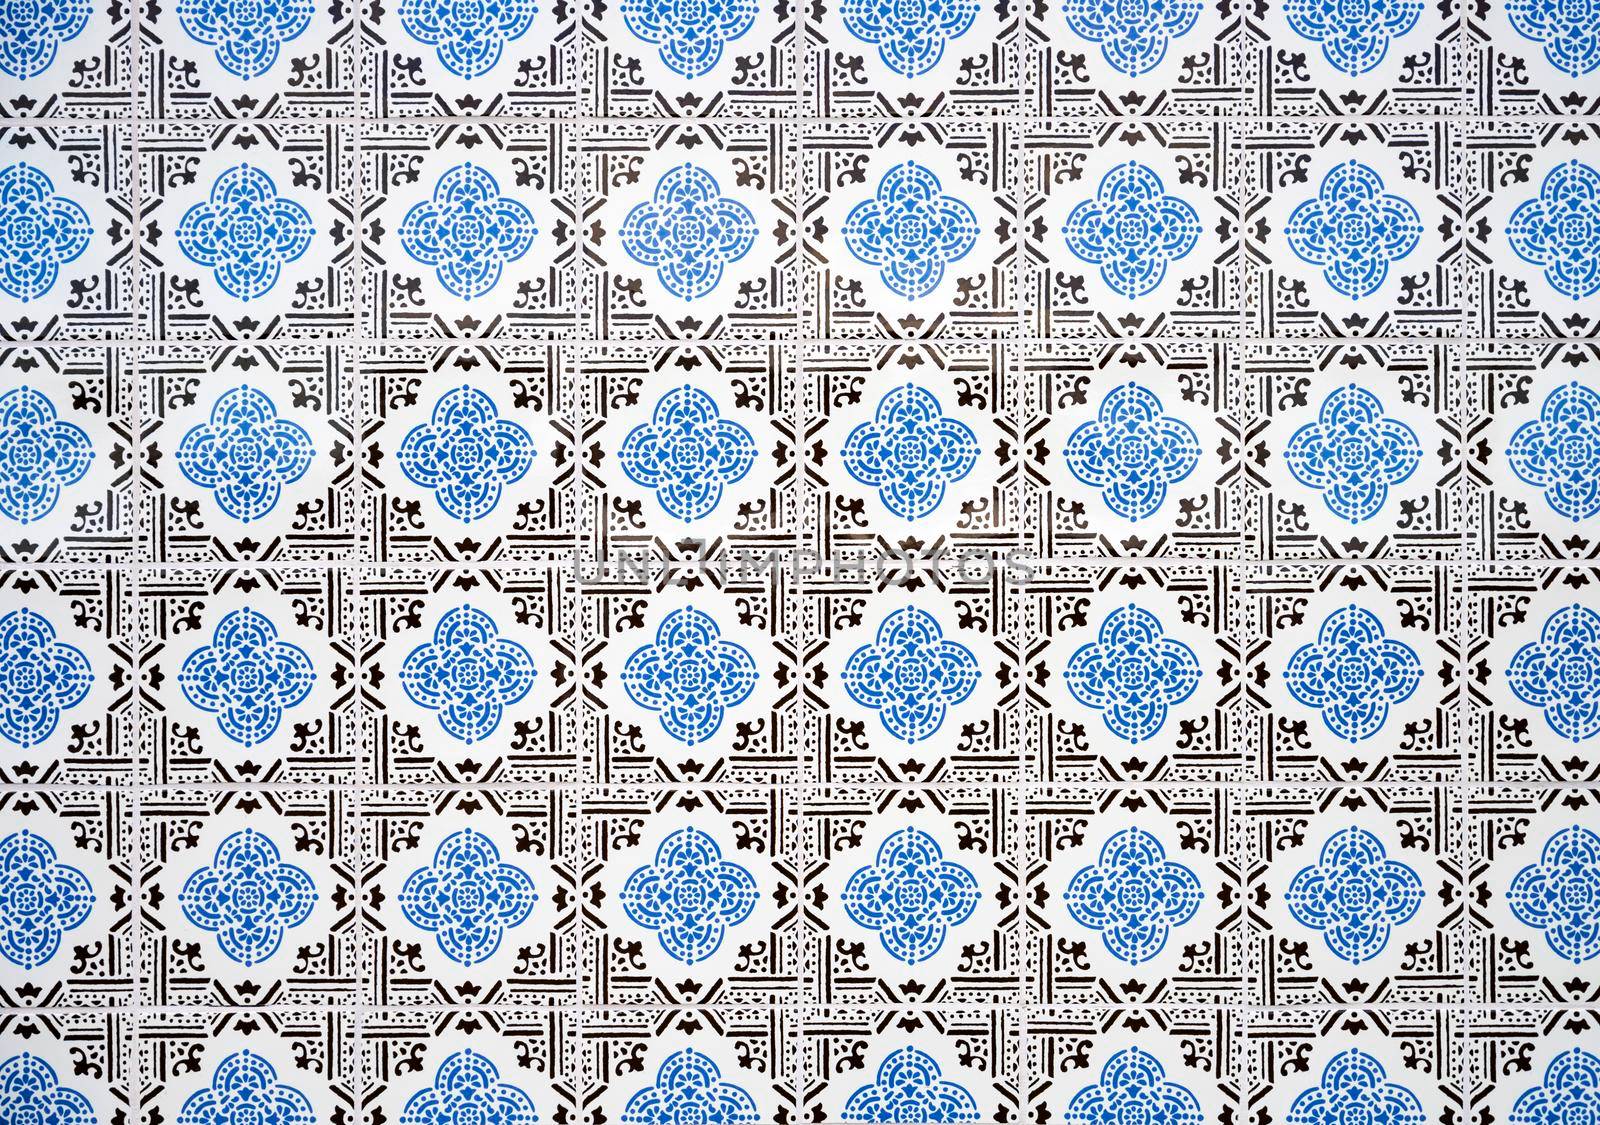 Azulejo is a form of Portuguese and Spanish painted tin-glazed ceramic tilework. Found on the interior and exterior of churches, palaces, houses, schools, restaurants and railway stations. They are an ornamental art form, but also had a specific functional capacity like temperature control in homes.